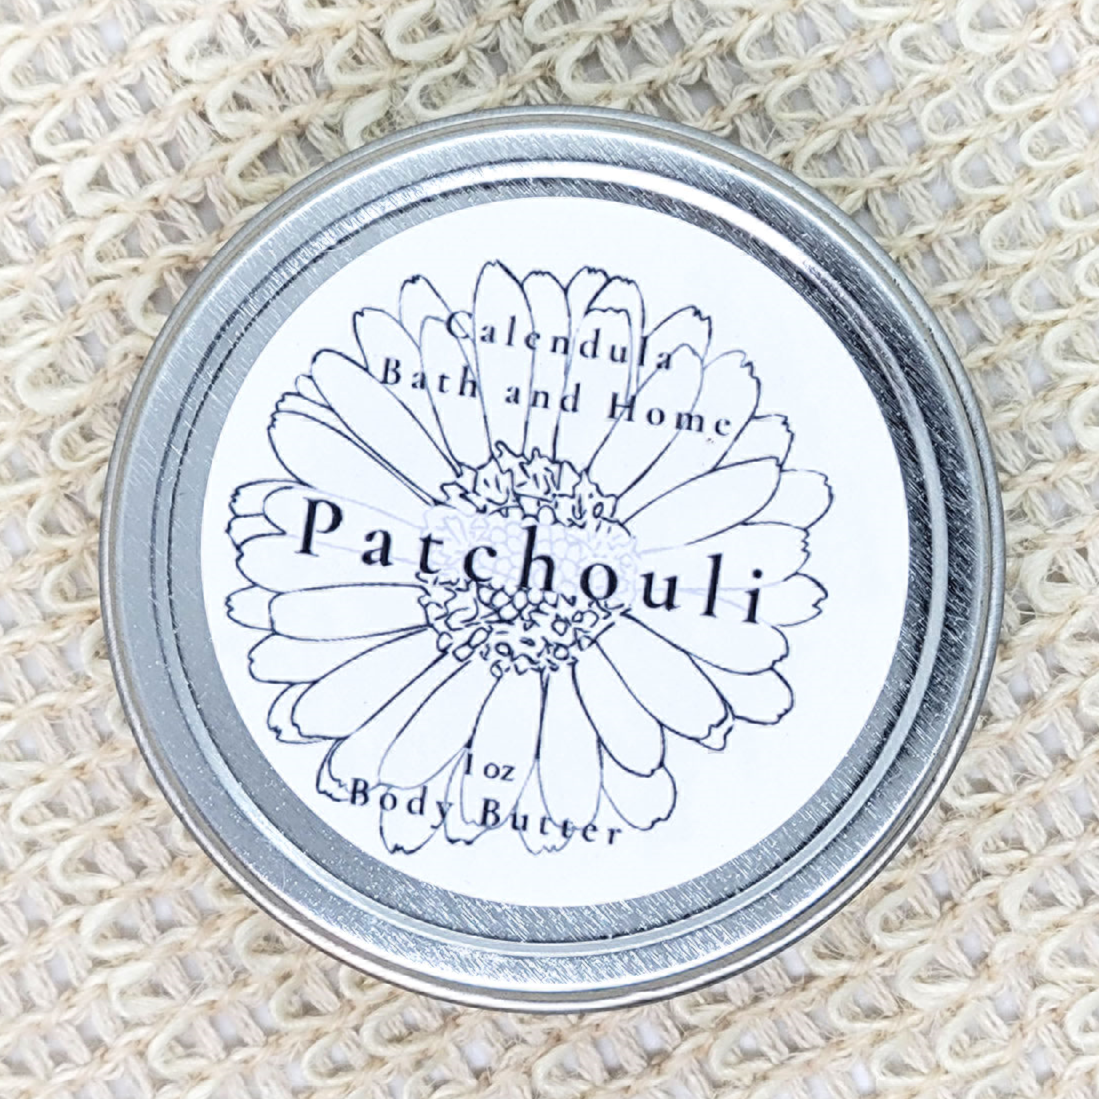 Patchouli body butter travel tin gifts